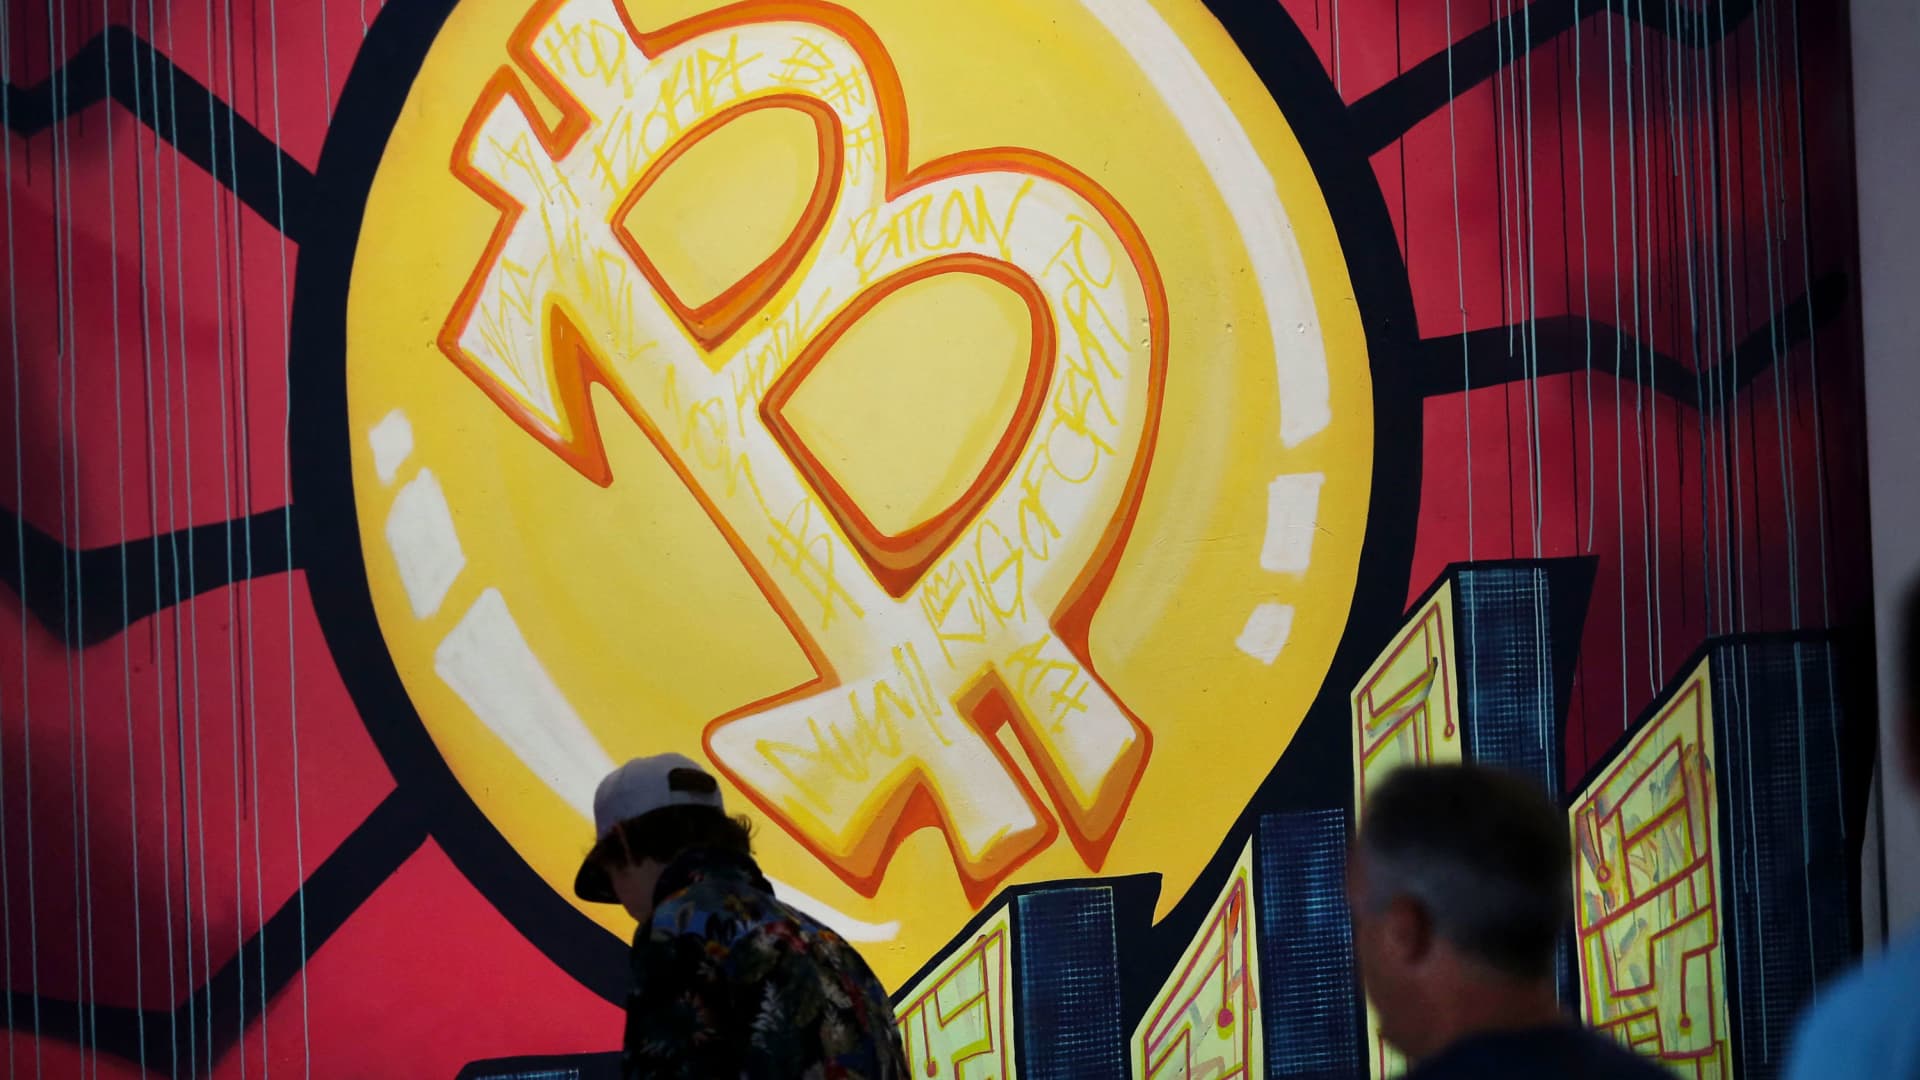 Art at the cryptocurrency conference Bitcoin 2021 Convention at the Mana Convention Center in Miami on June 4, 2021.